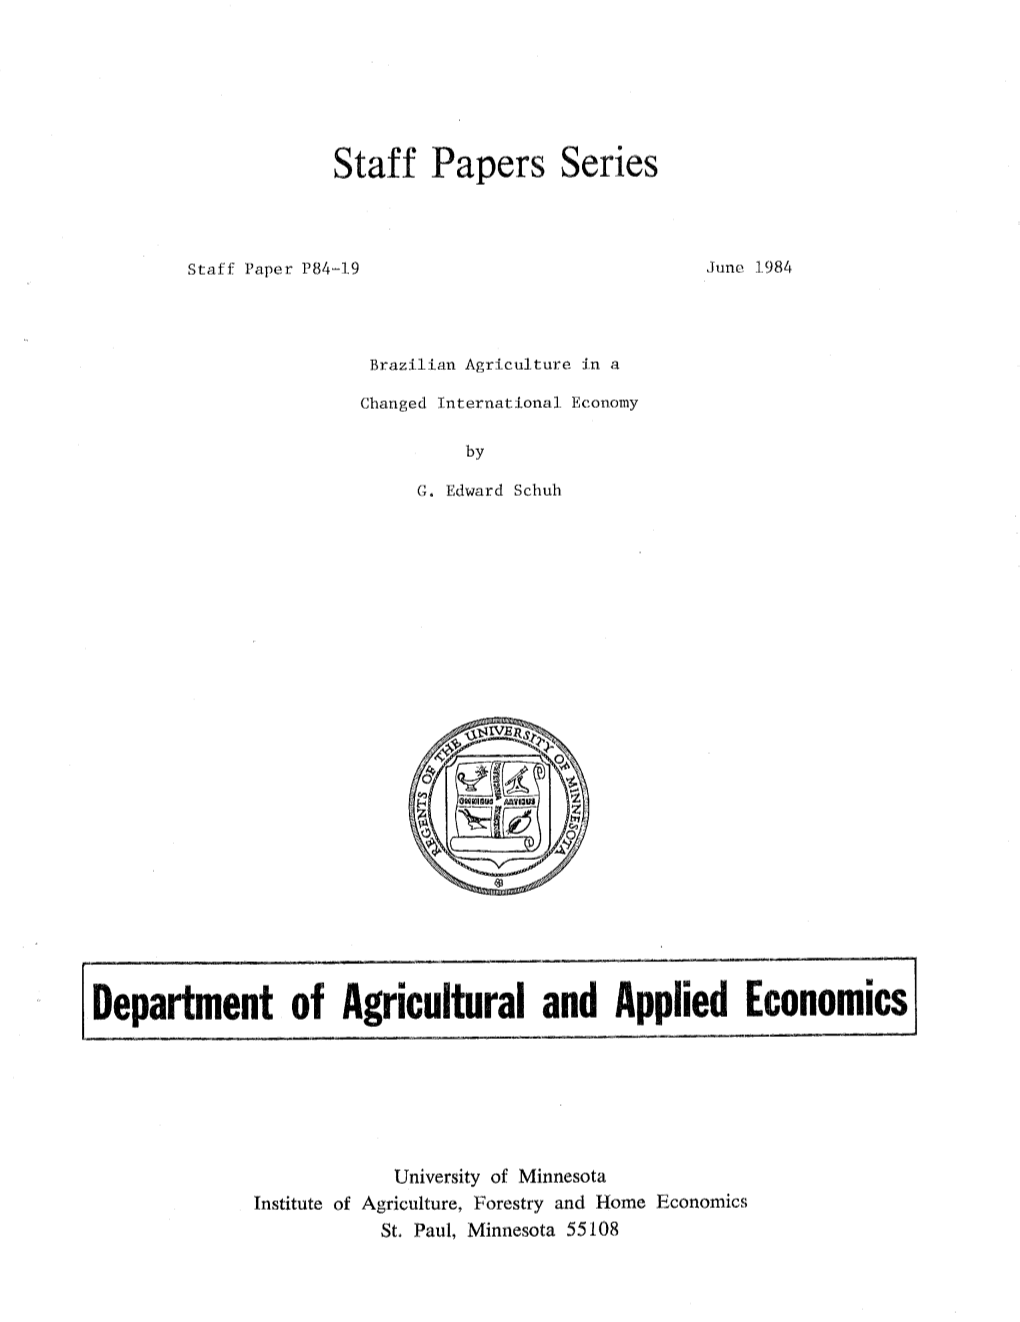 Depatiment of Agricultural and Appliedeconomics